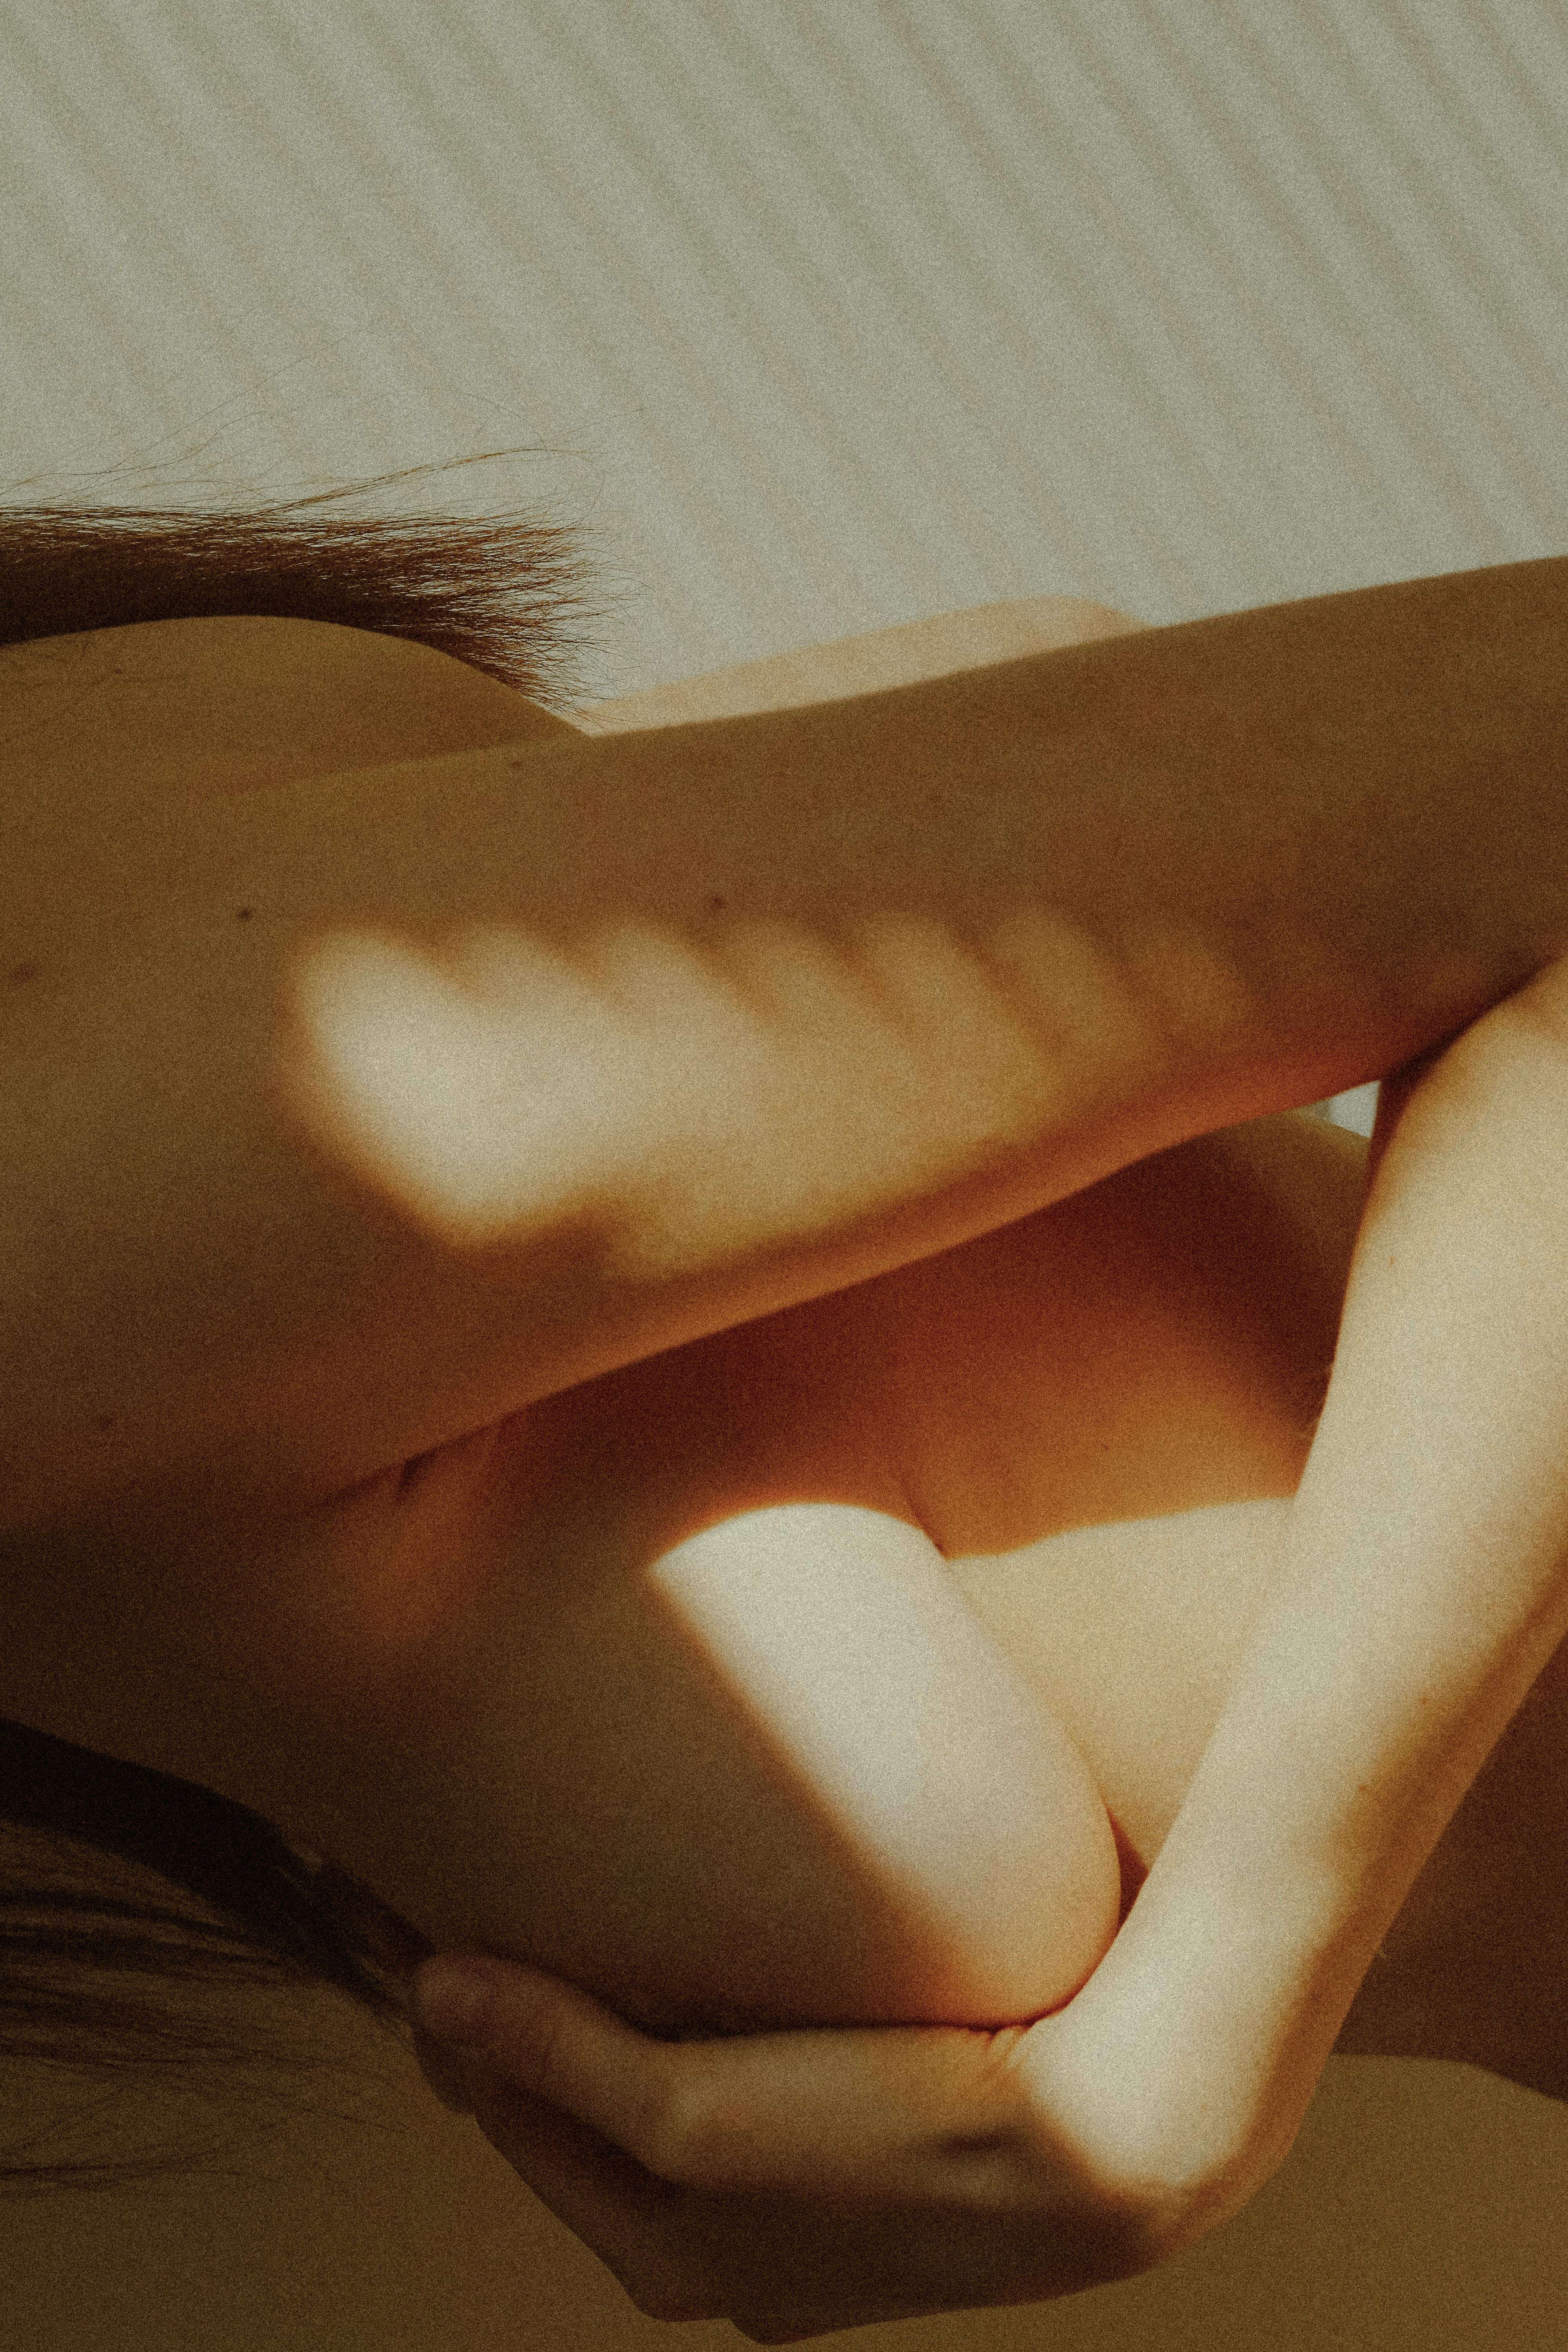 abstract image of a nude woman in sunlight and shadow